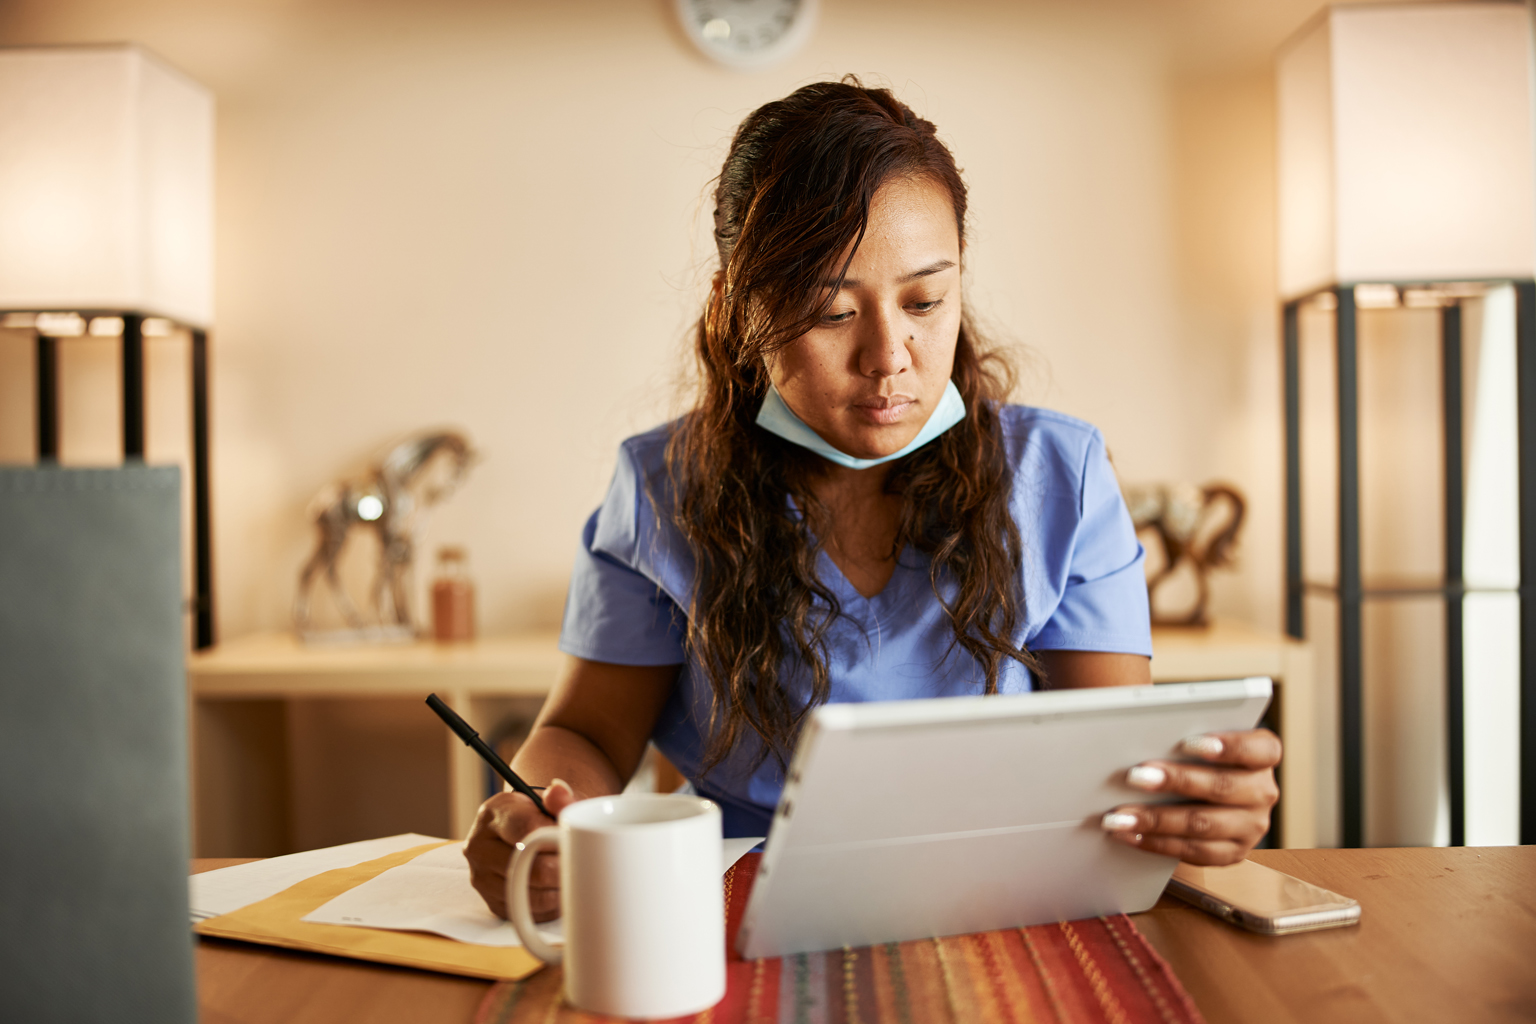 Nurse working from home doing paperwork and using tablet